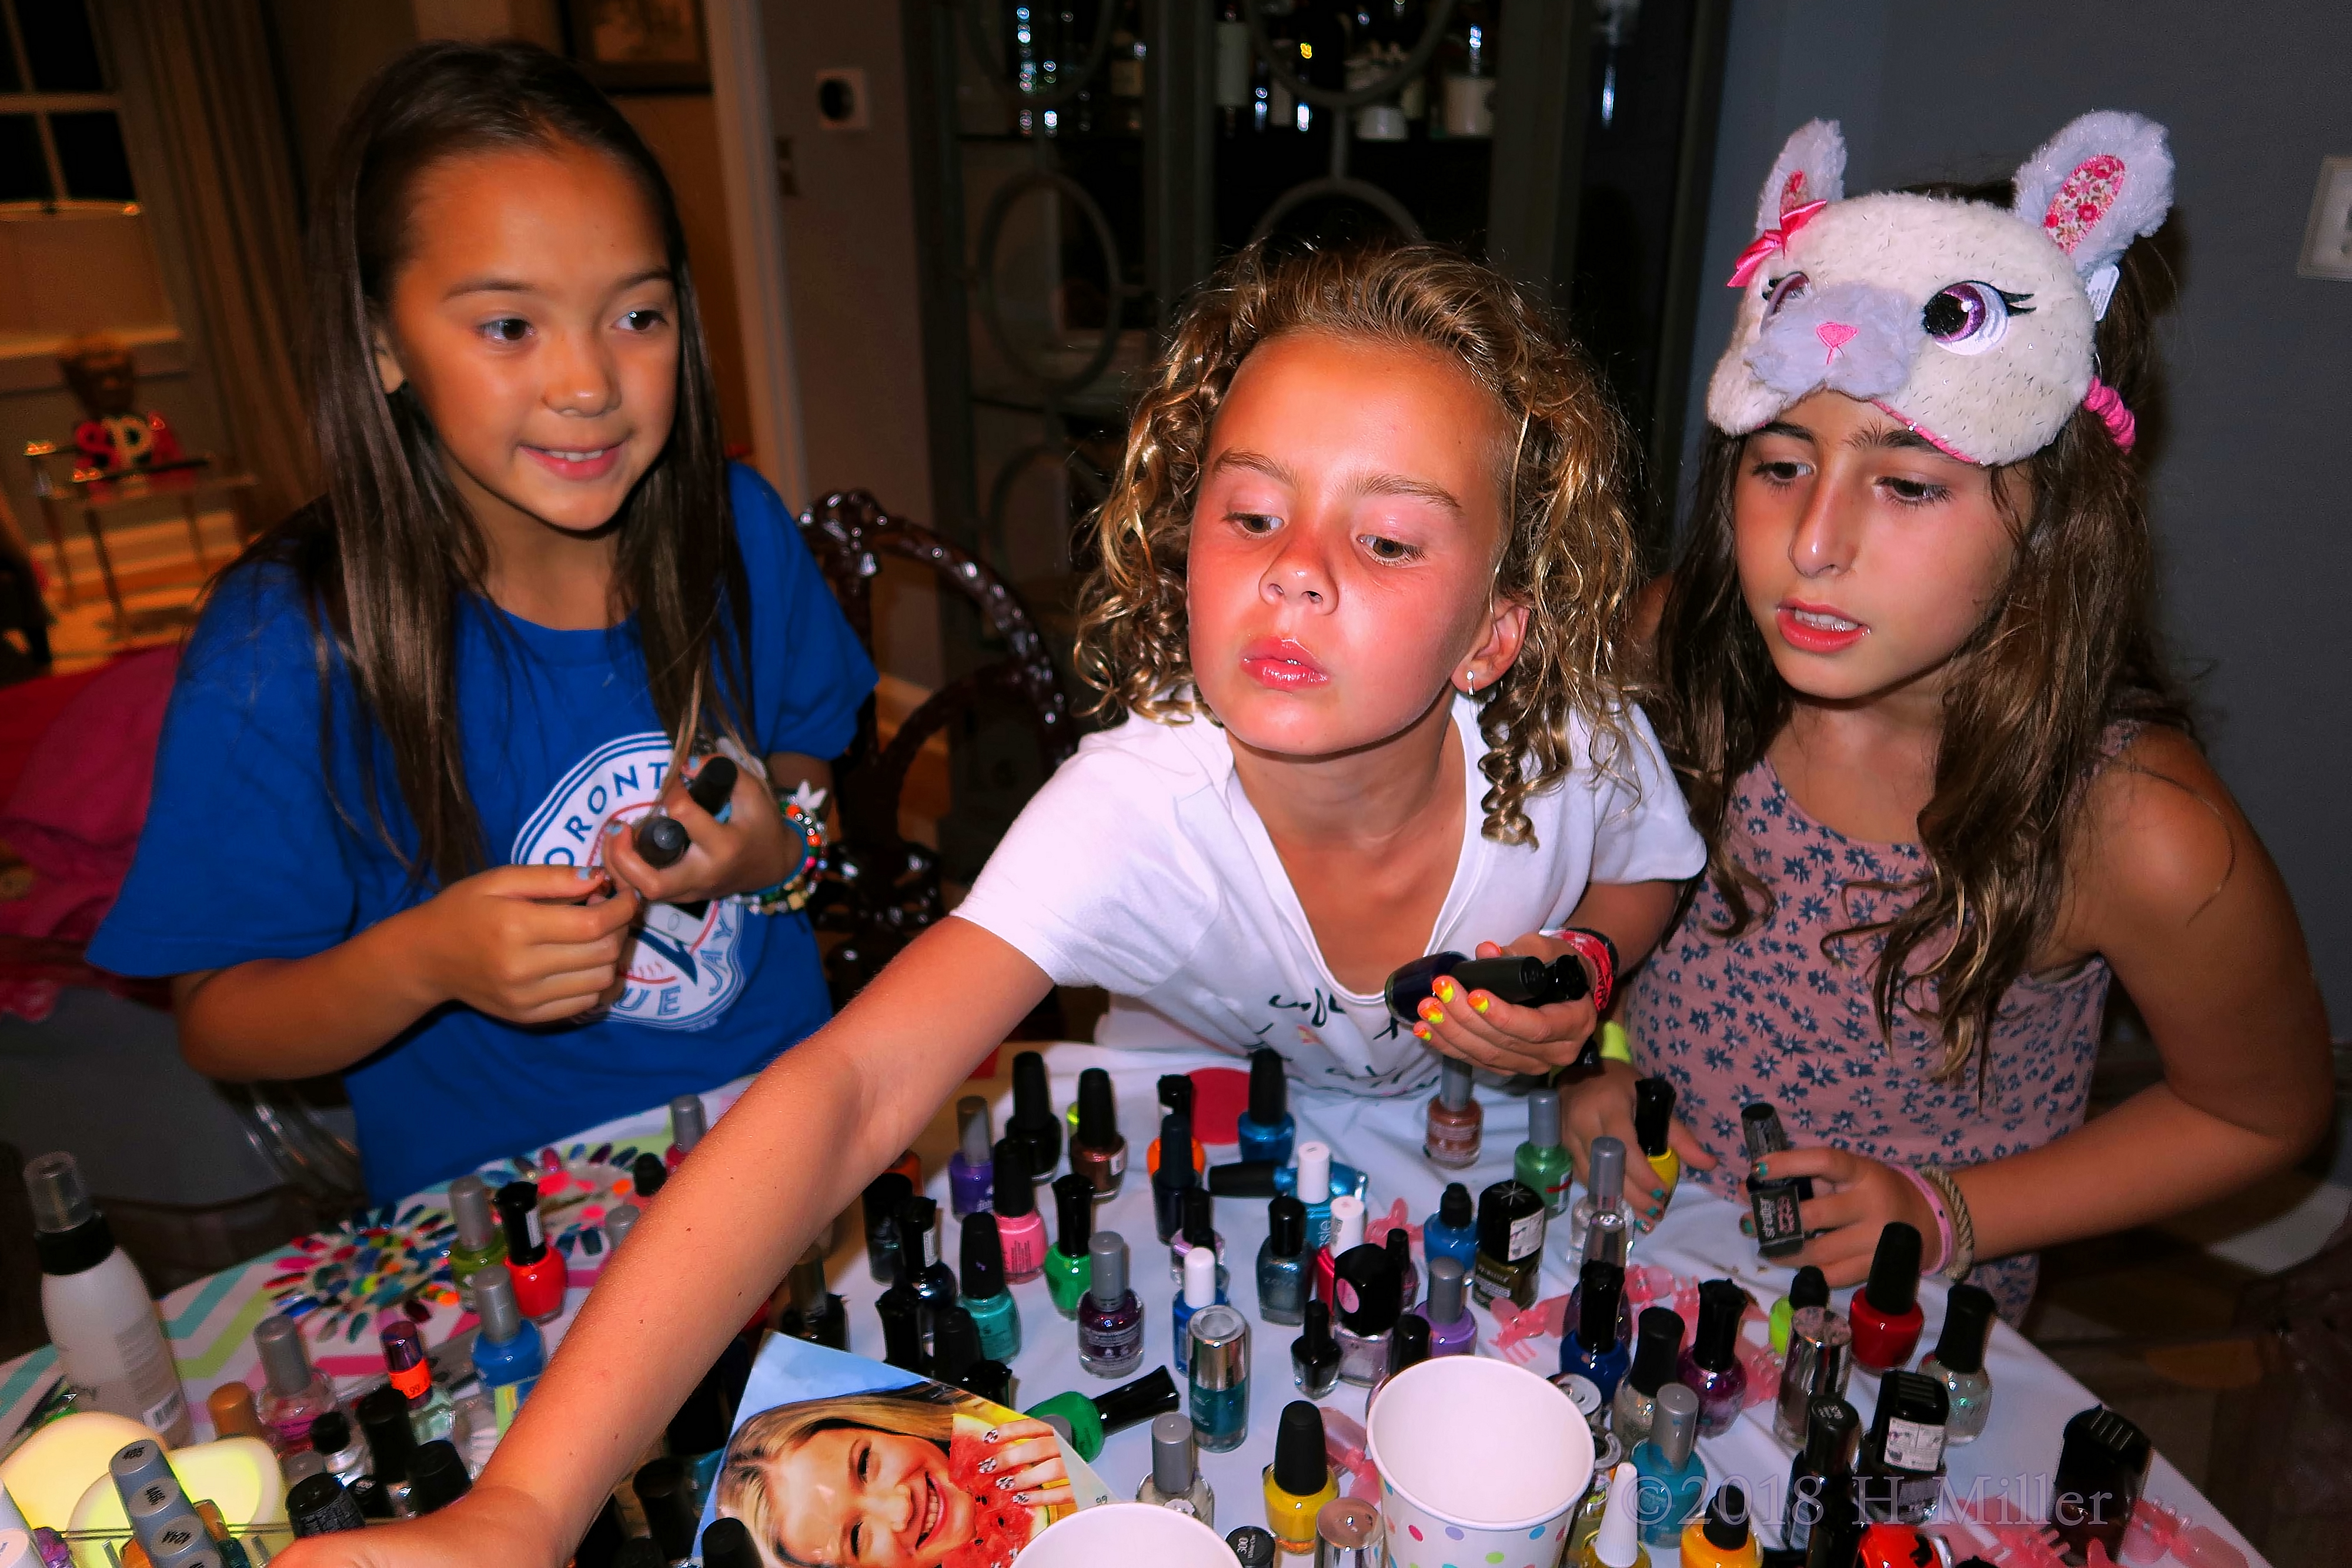 Choosing Their Favourite Nail Color Out Of This Awesome Bunch! 